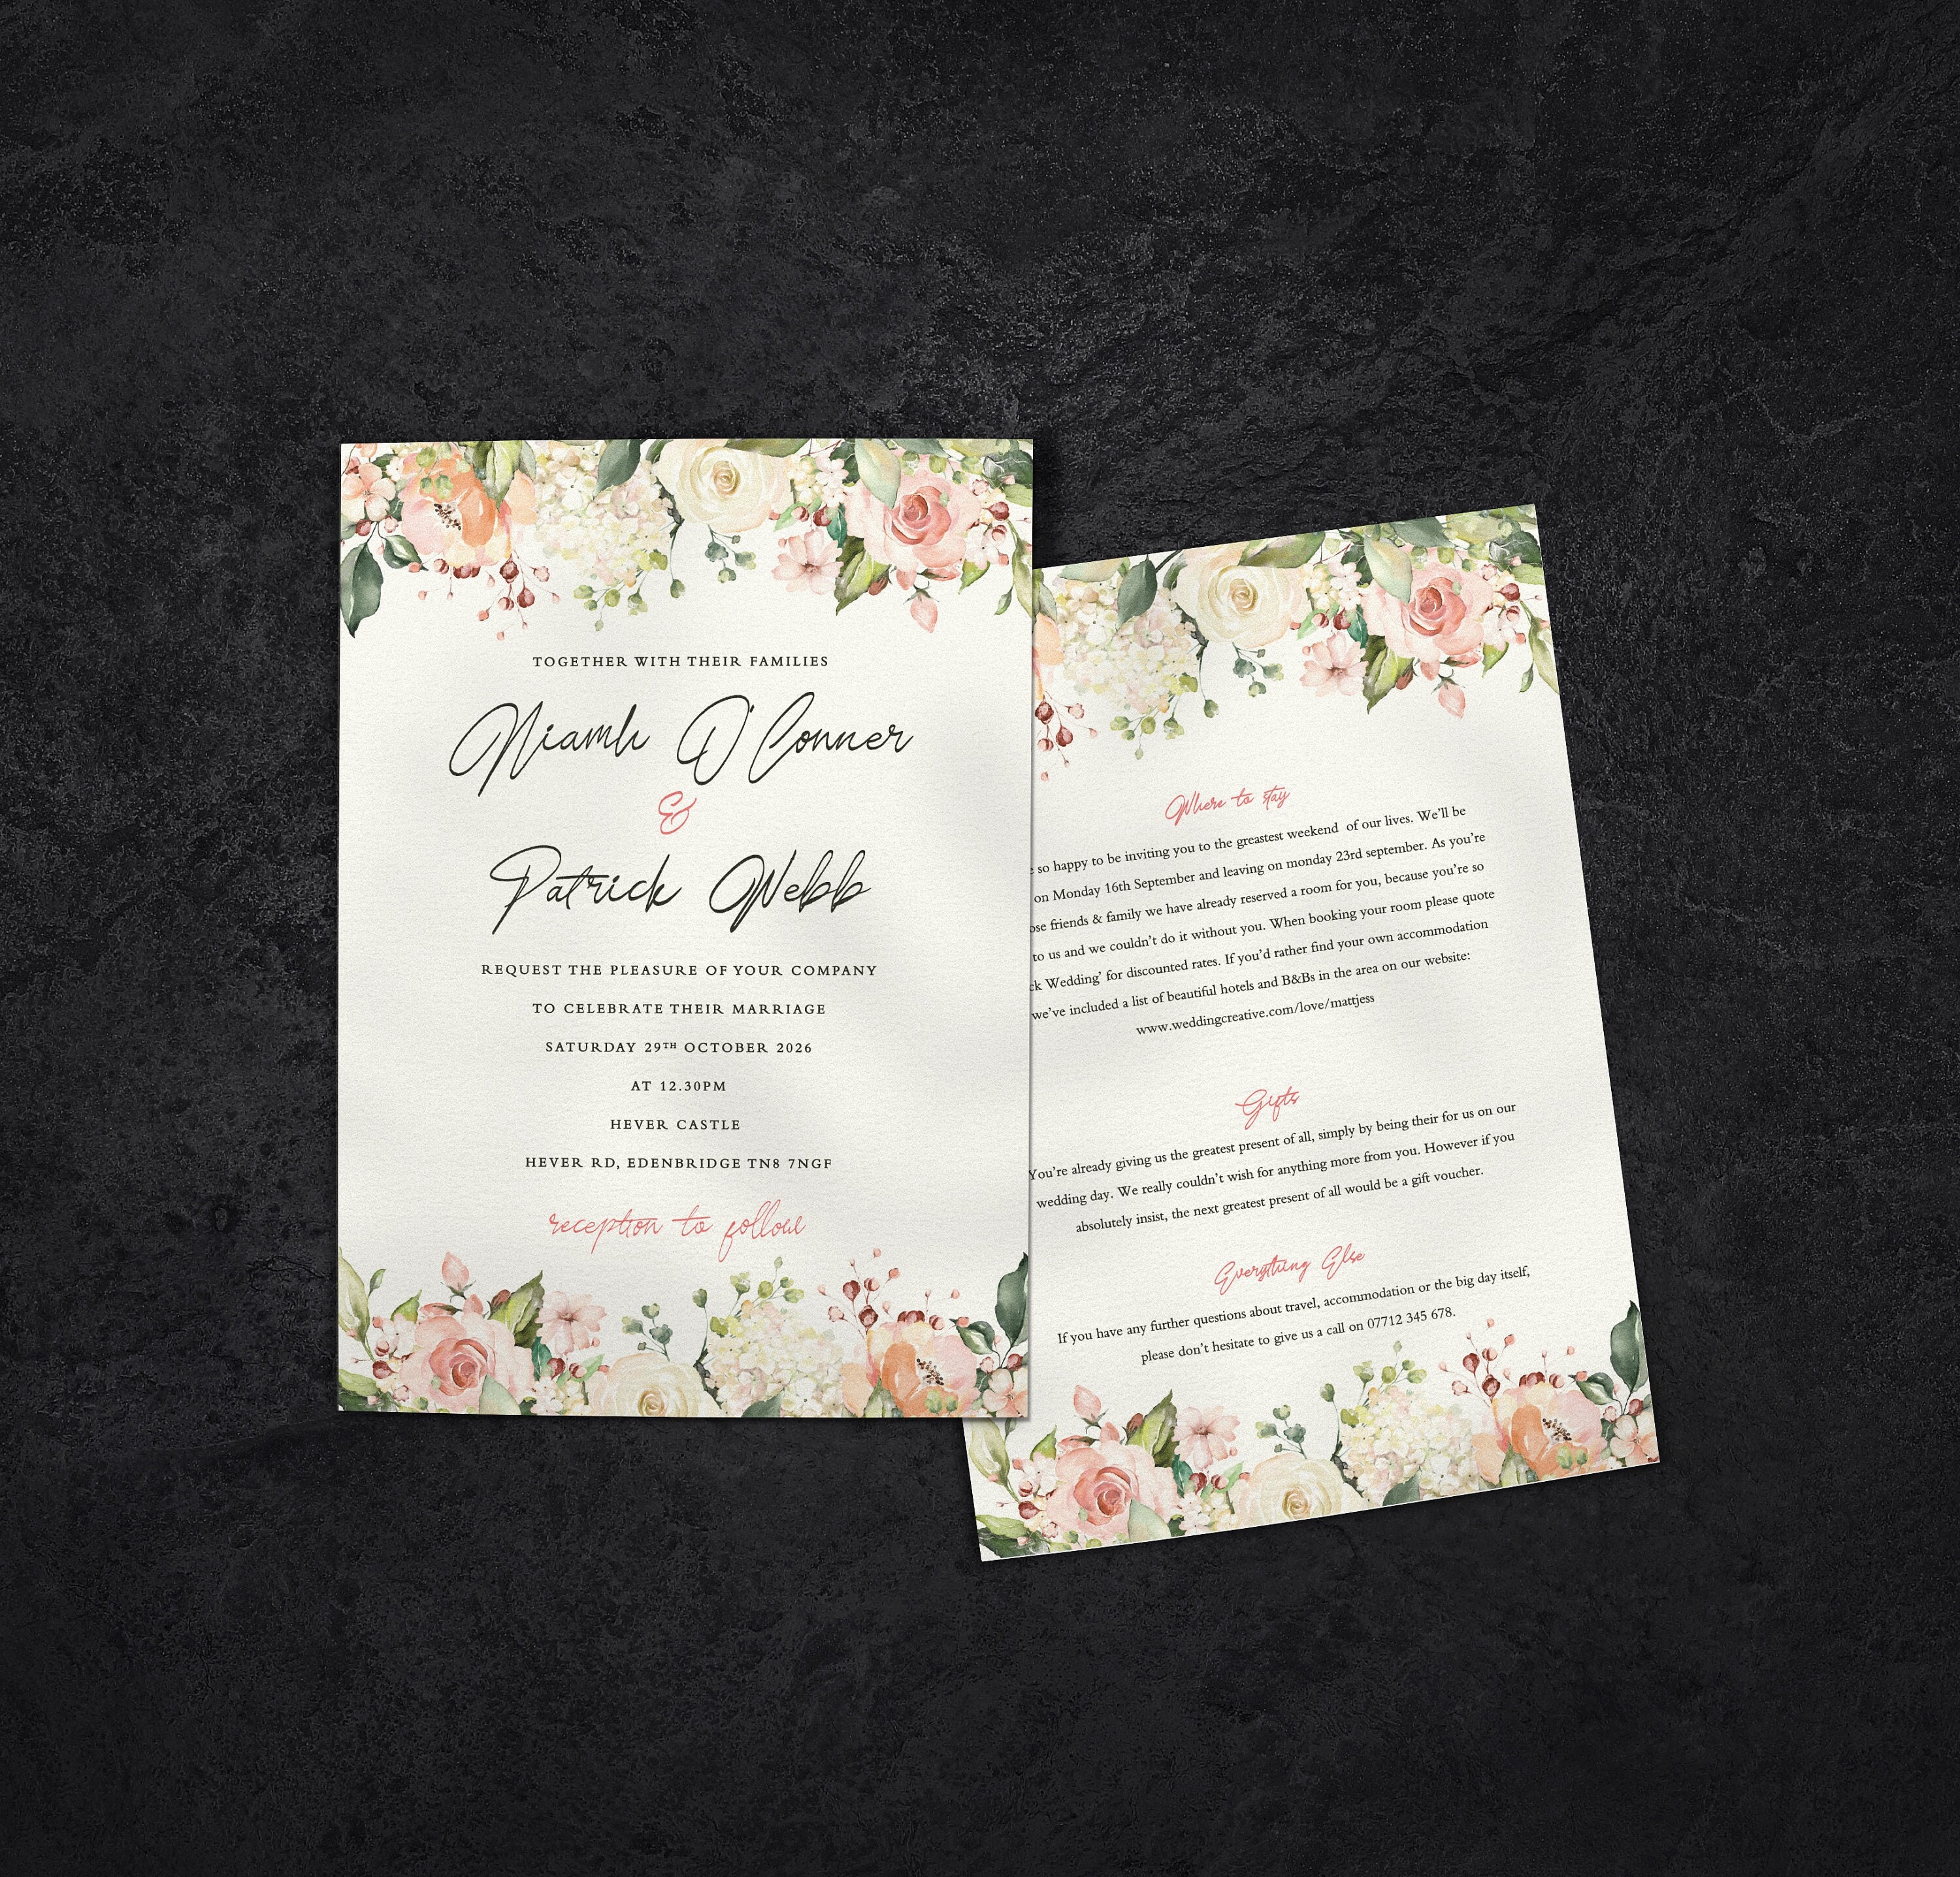 Juvale 50-Pack Watercolor Join Us Invitation Cards with Envelopes, Floral Design (5 x 7 Inches)